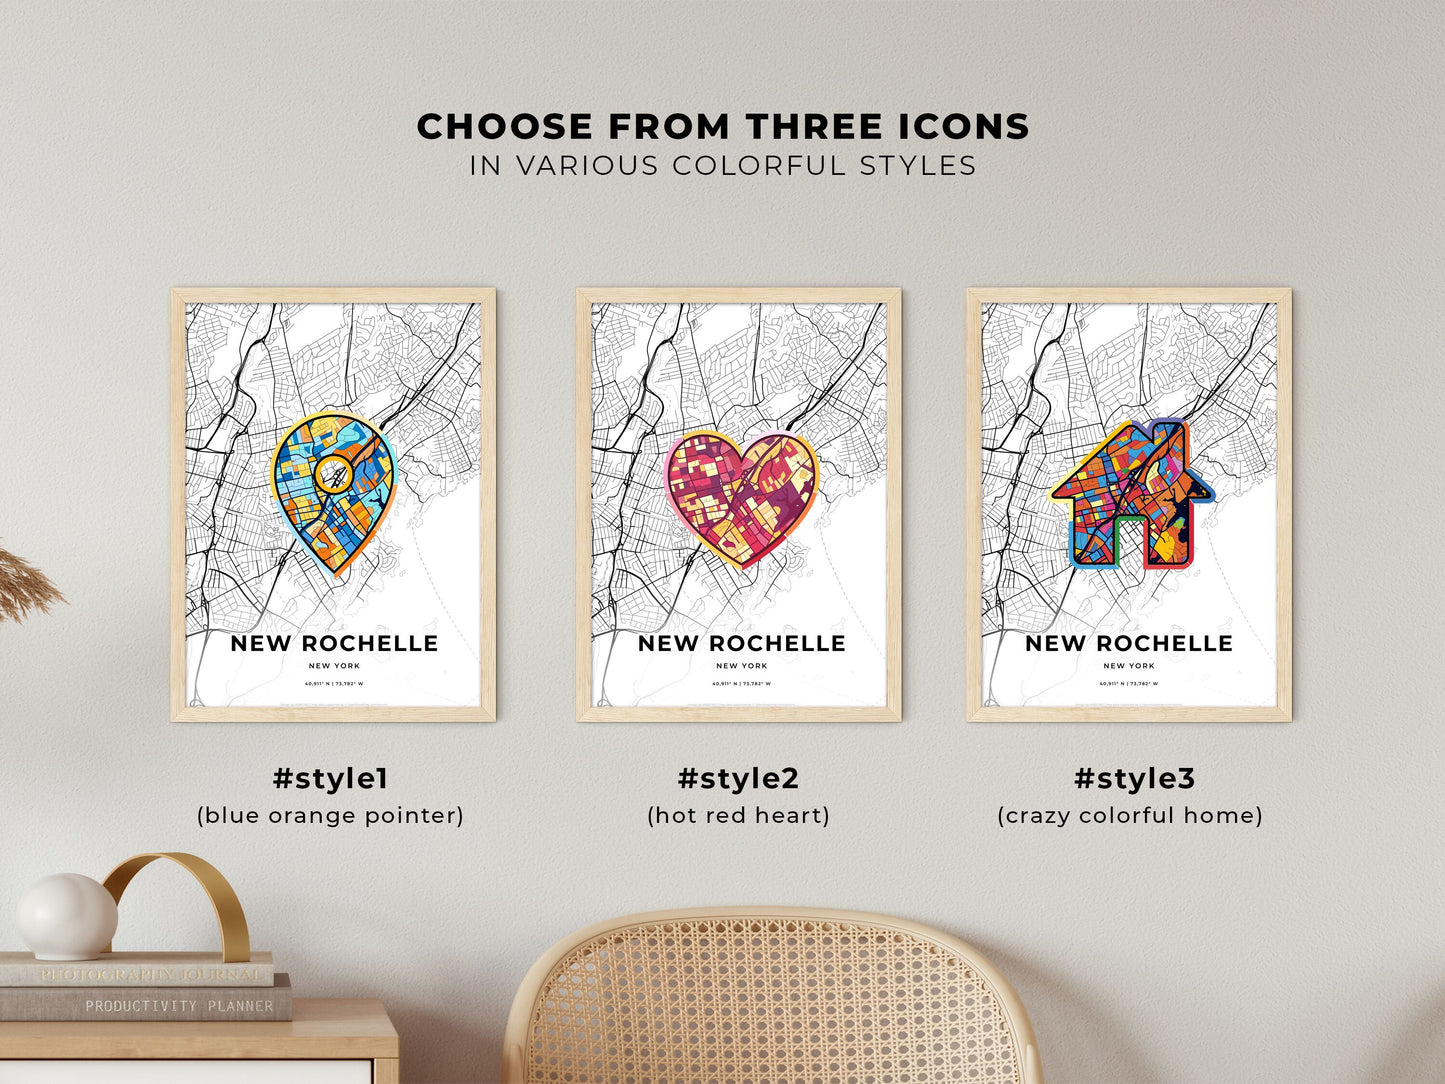 NEW ROCHELLE NEW YORK minimal art map with a colorful icon. Where it all began, Couple map gift.